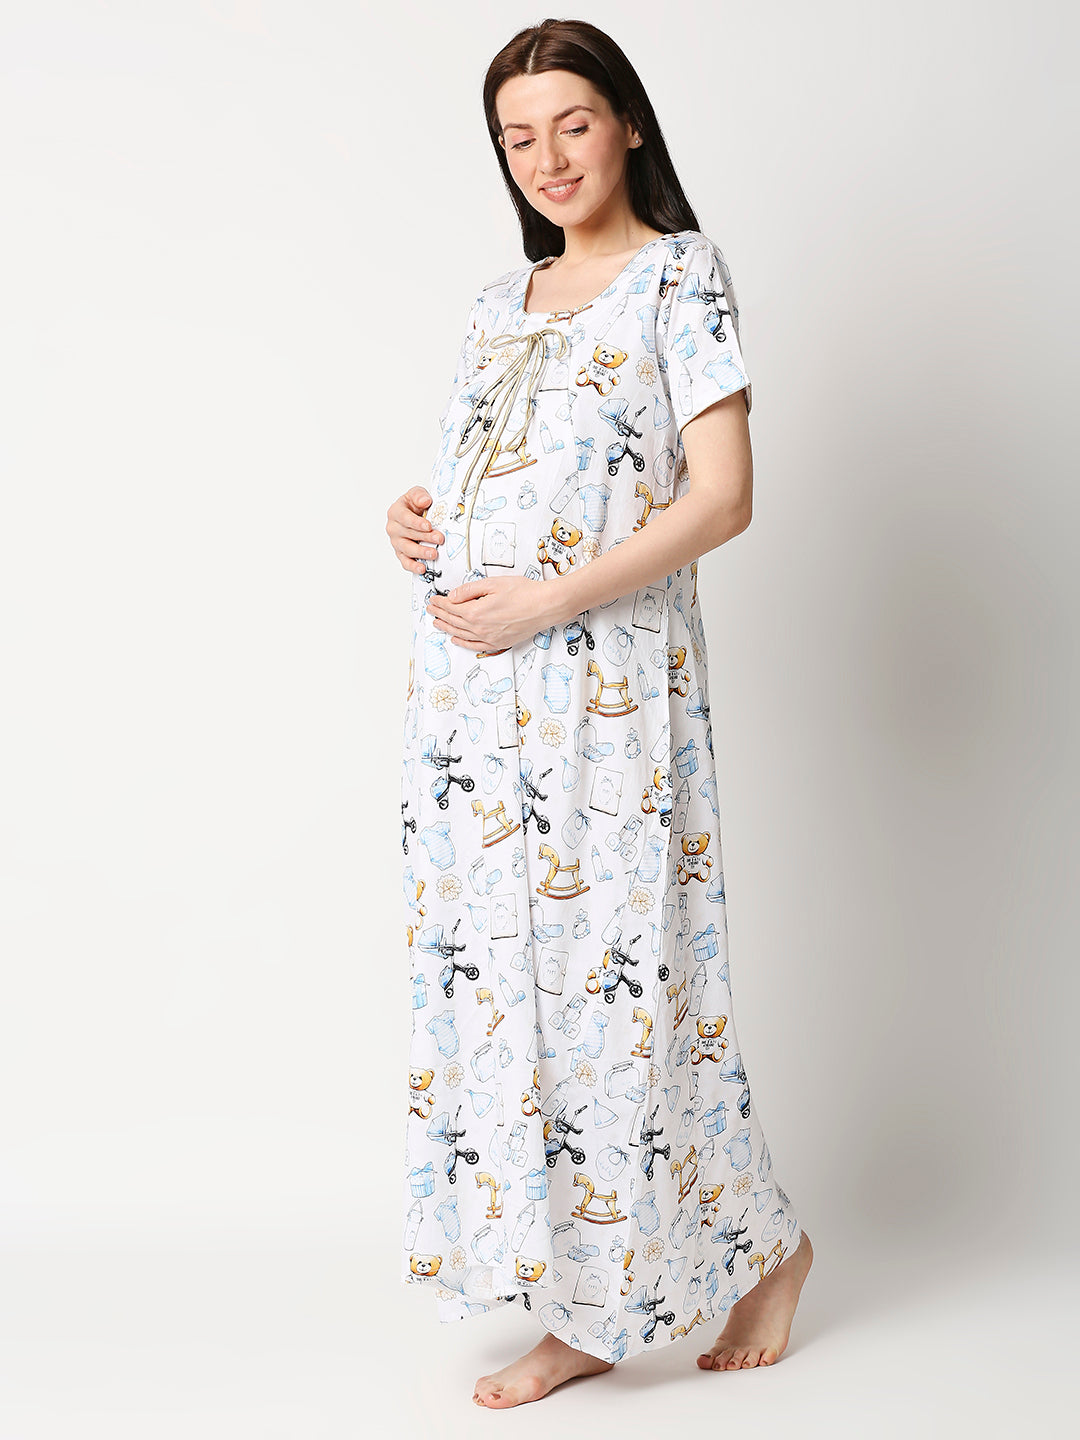 Baby Dior Maternity Gown - Pure Cotton Round Neck Gown with 2 Invisible Zips for Feeding